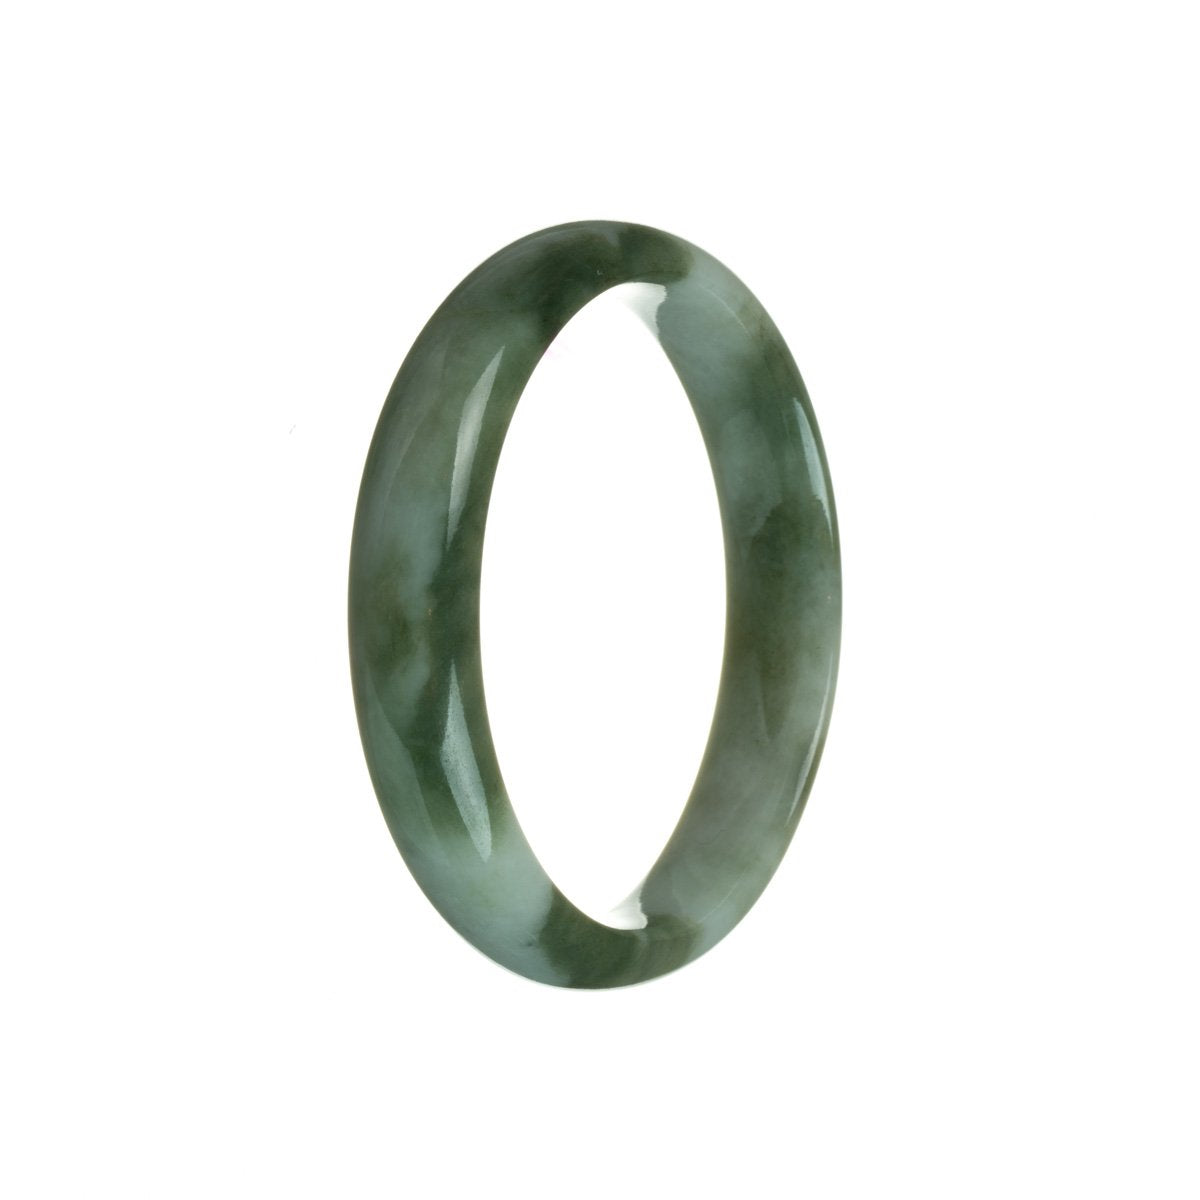 A half moon-shaped traditional jade bracelet with a real untreated green color and an intricate pattern.